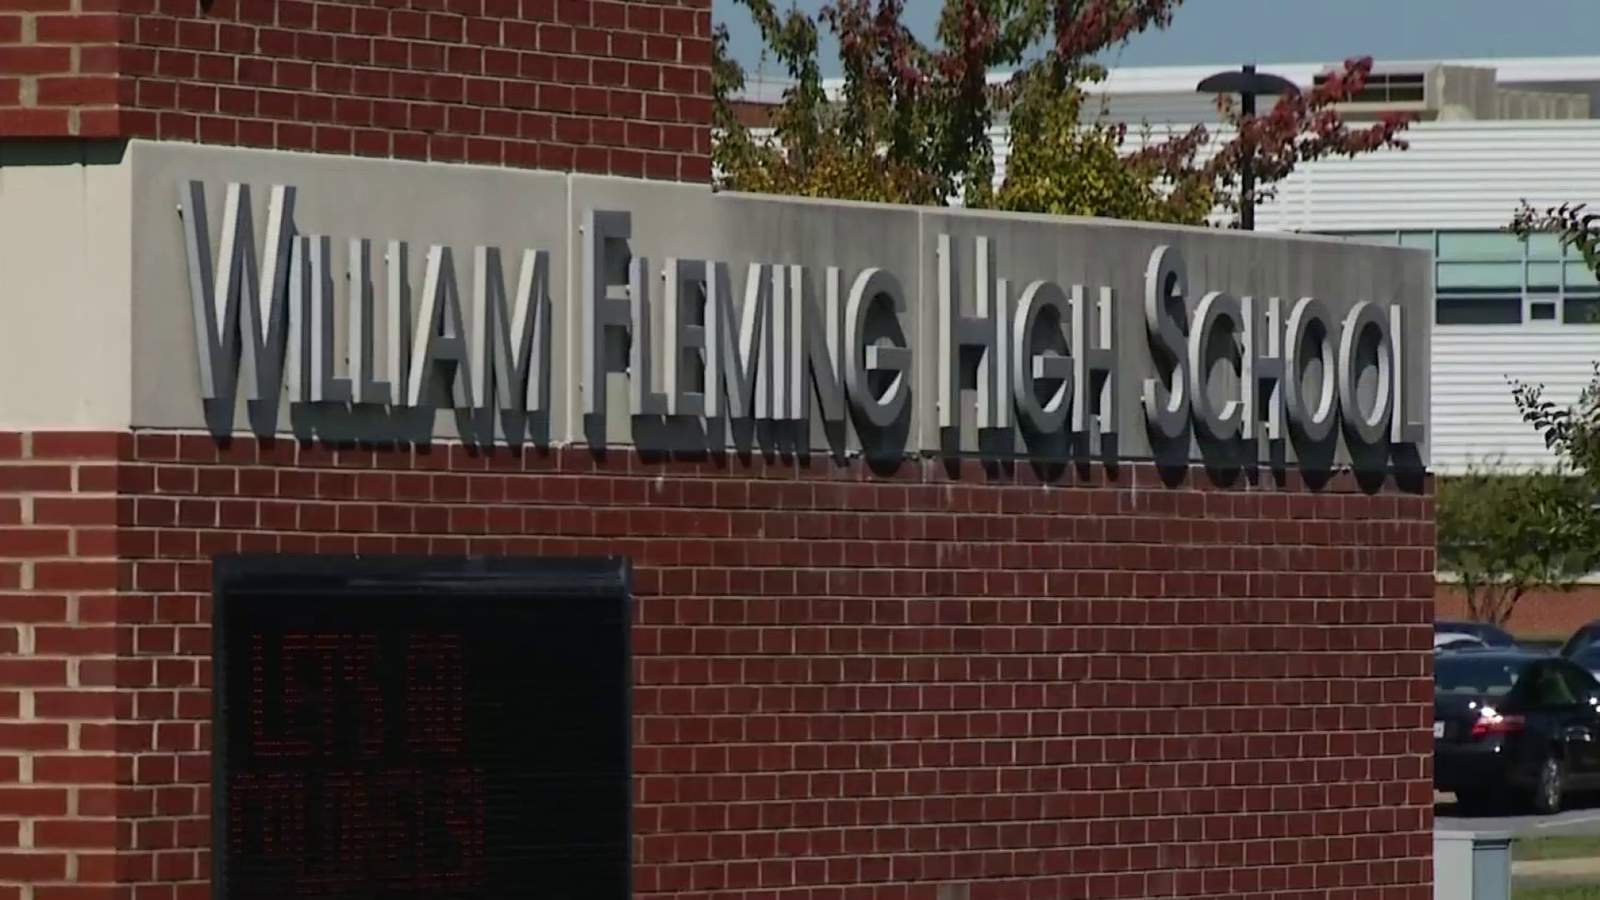 William Fleming High School to close after two staff members test positive for coronavirus